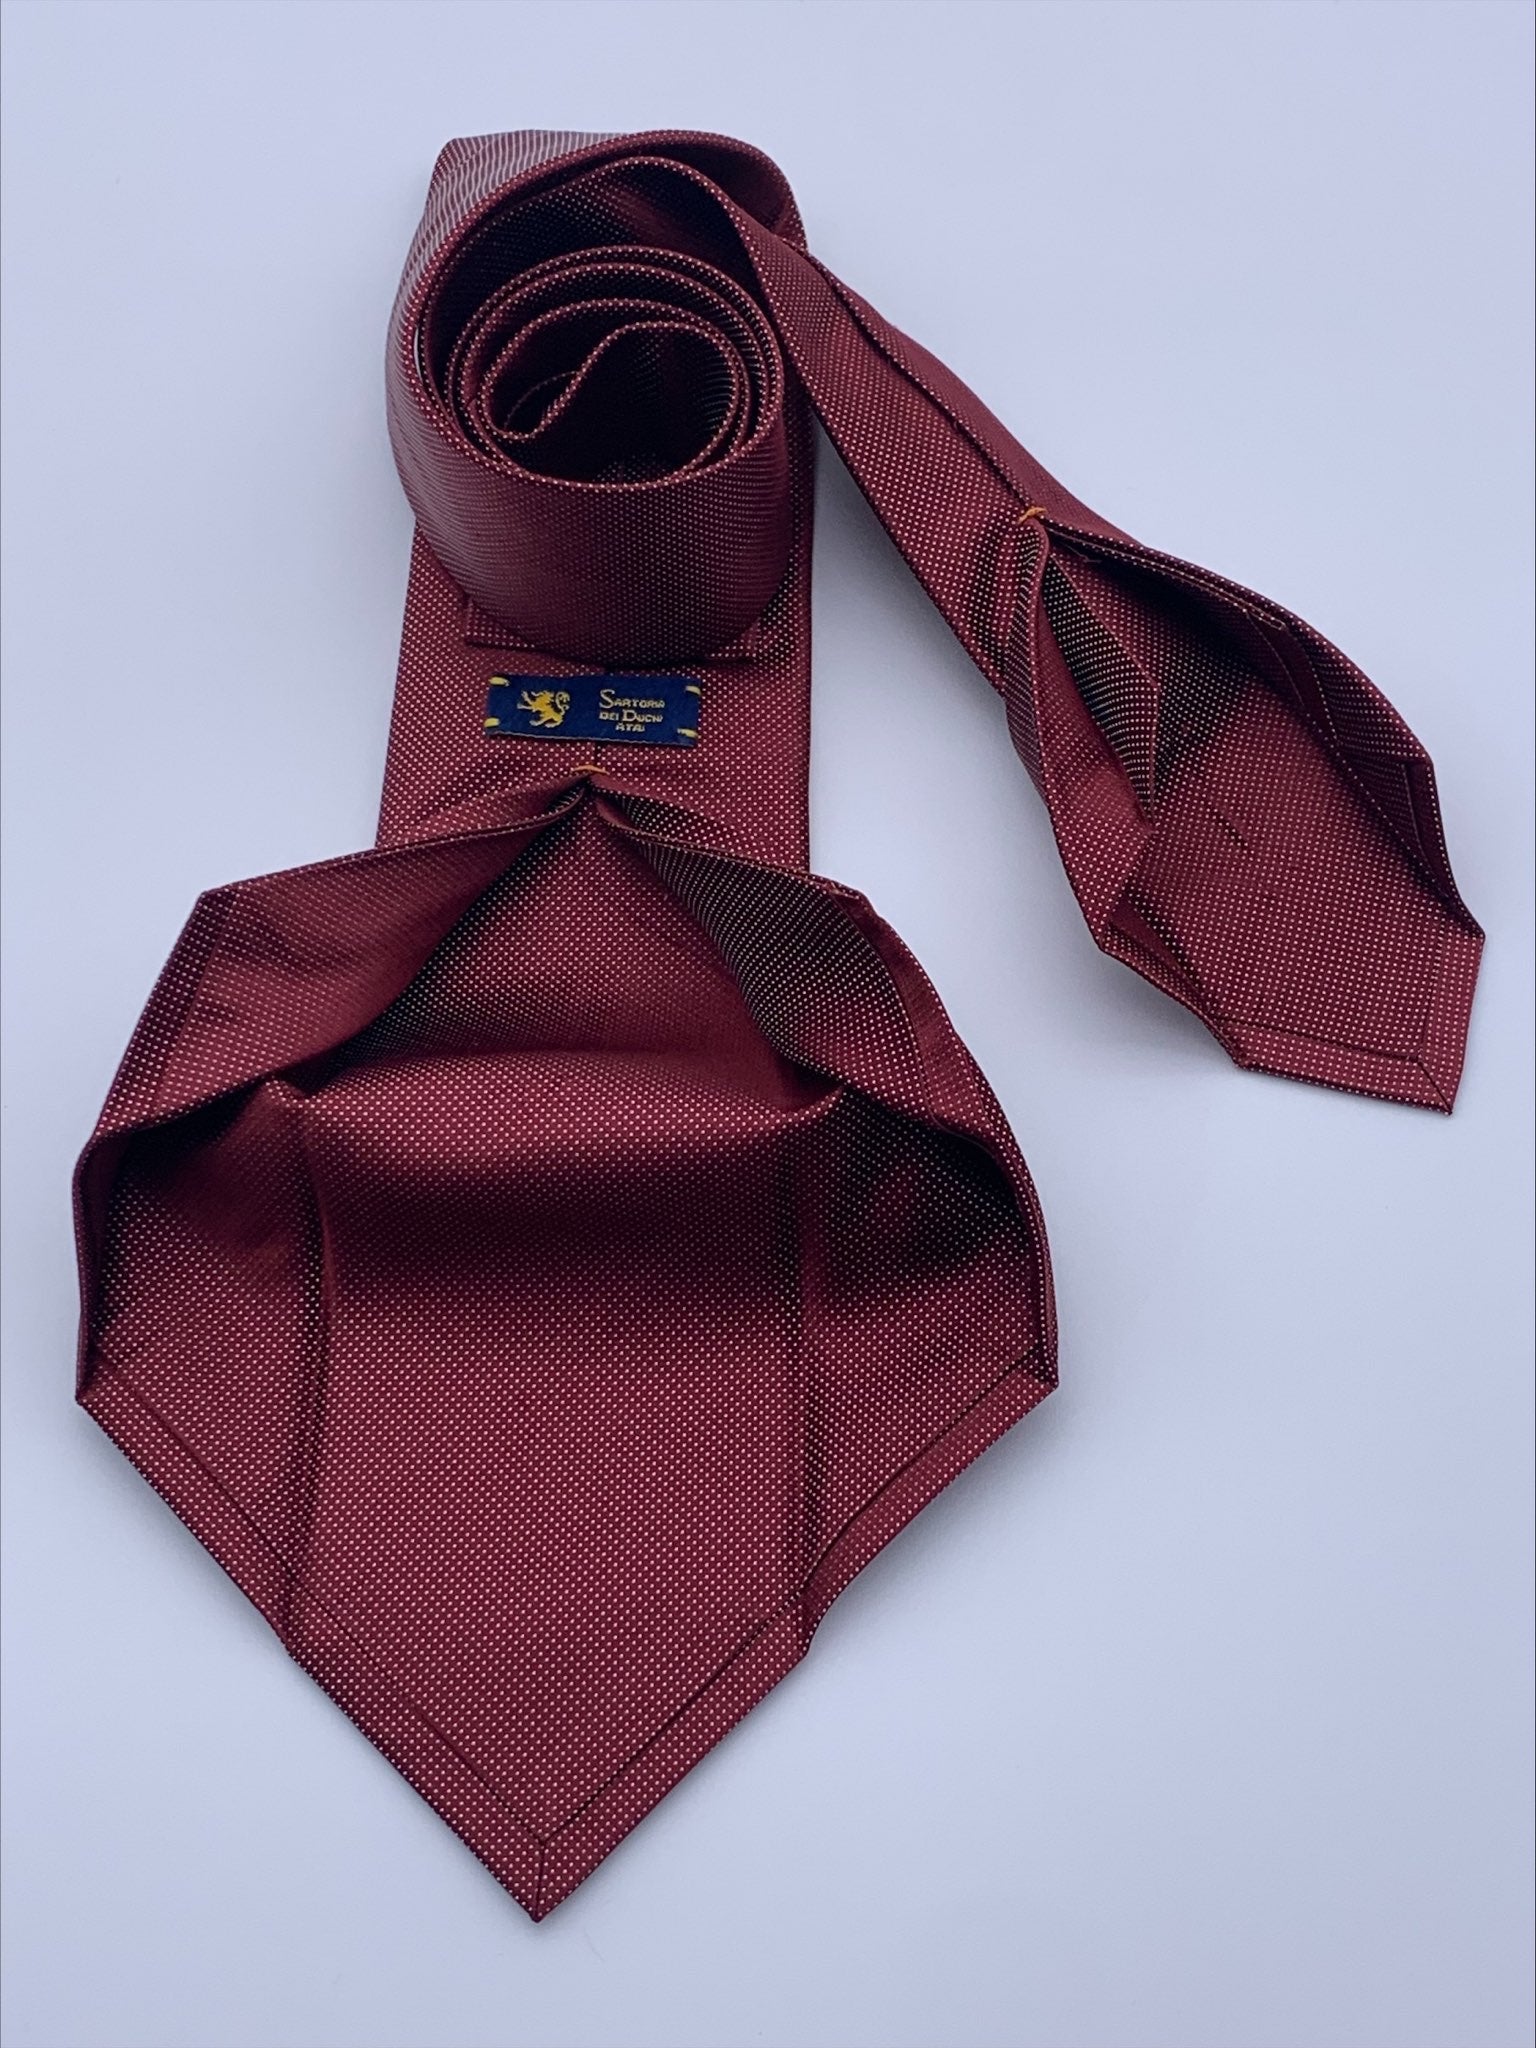 Pure silk seven fold tie.Handmade by our Italian tailors.100% Pure silk.Our ties standard width is 8 cm (3.15 inch), standard length is 150 cm (59 inch) |Sartoria Dei Duchi-Atri